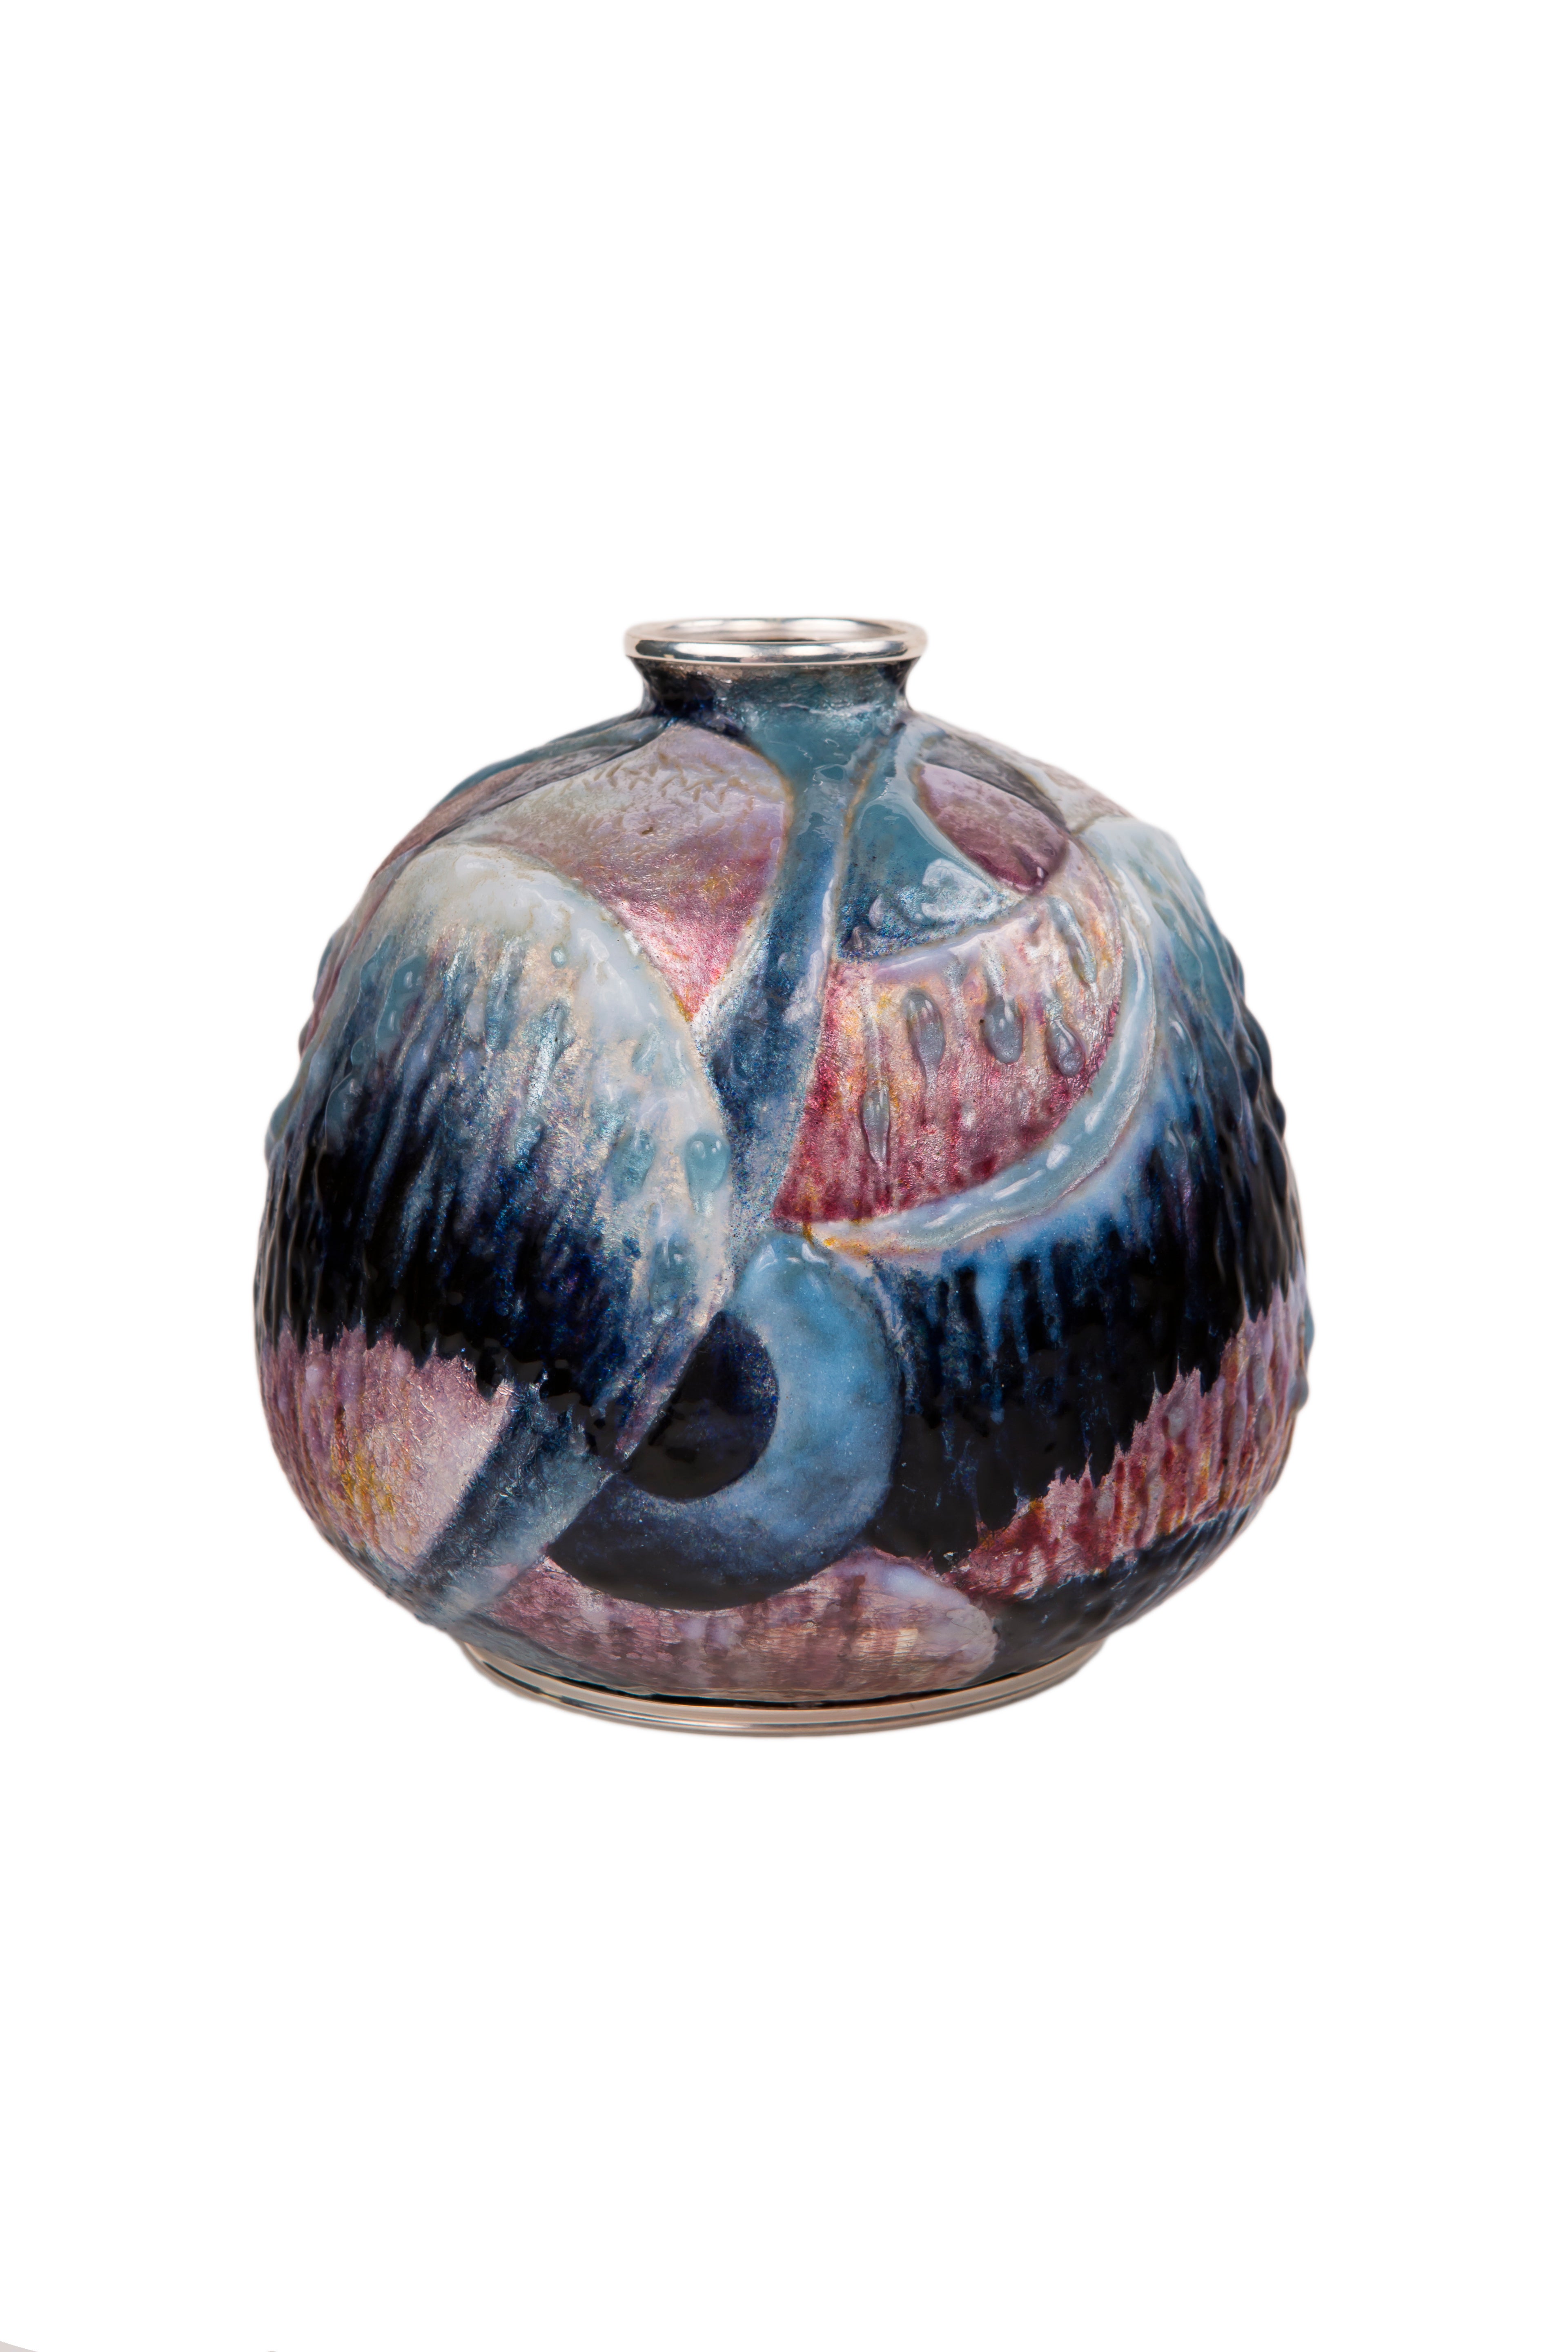 Geometric Enameled Vase by Camille Fauré